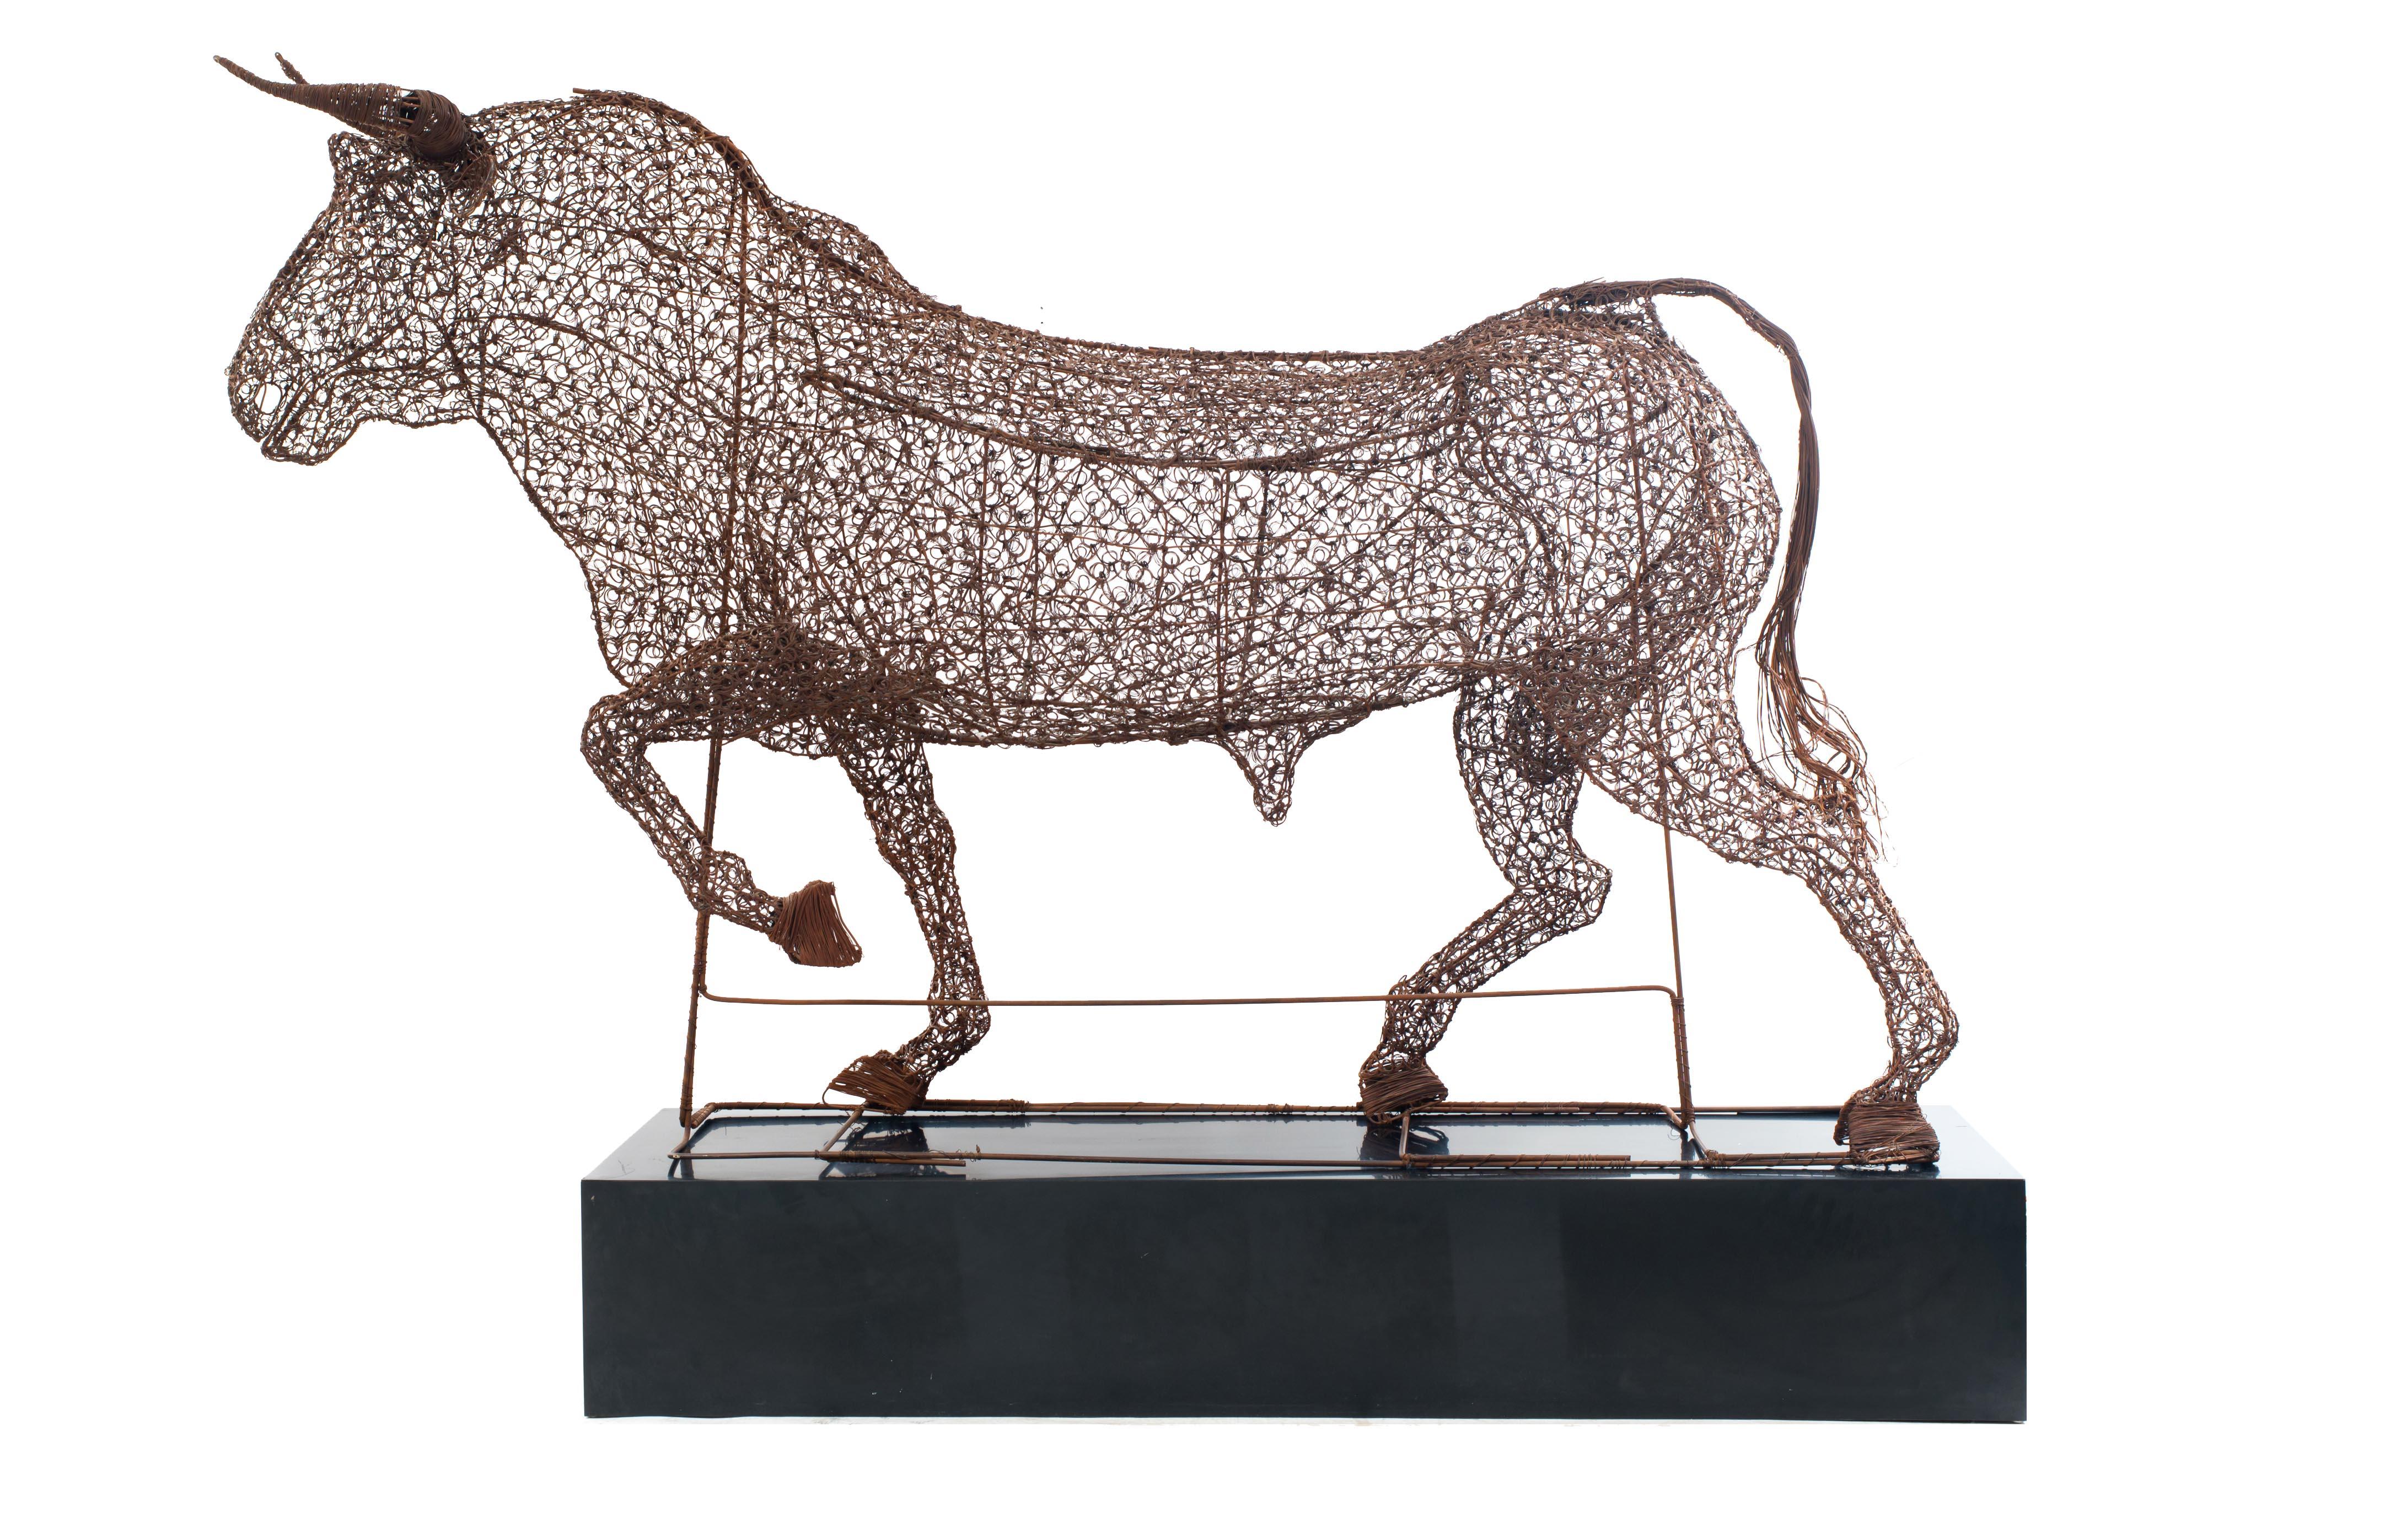 Spanish-style life size wire bull figure resting on a black plinth (1950s).
